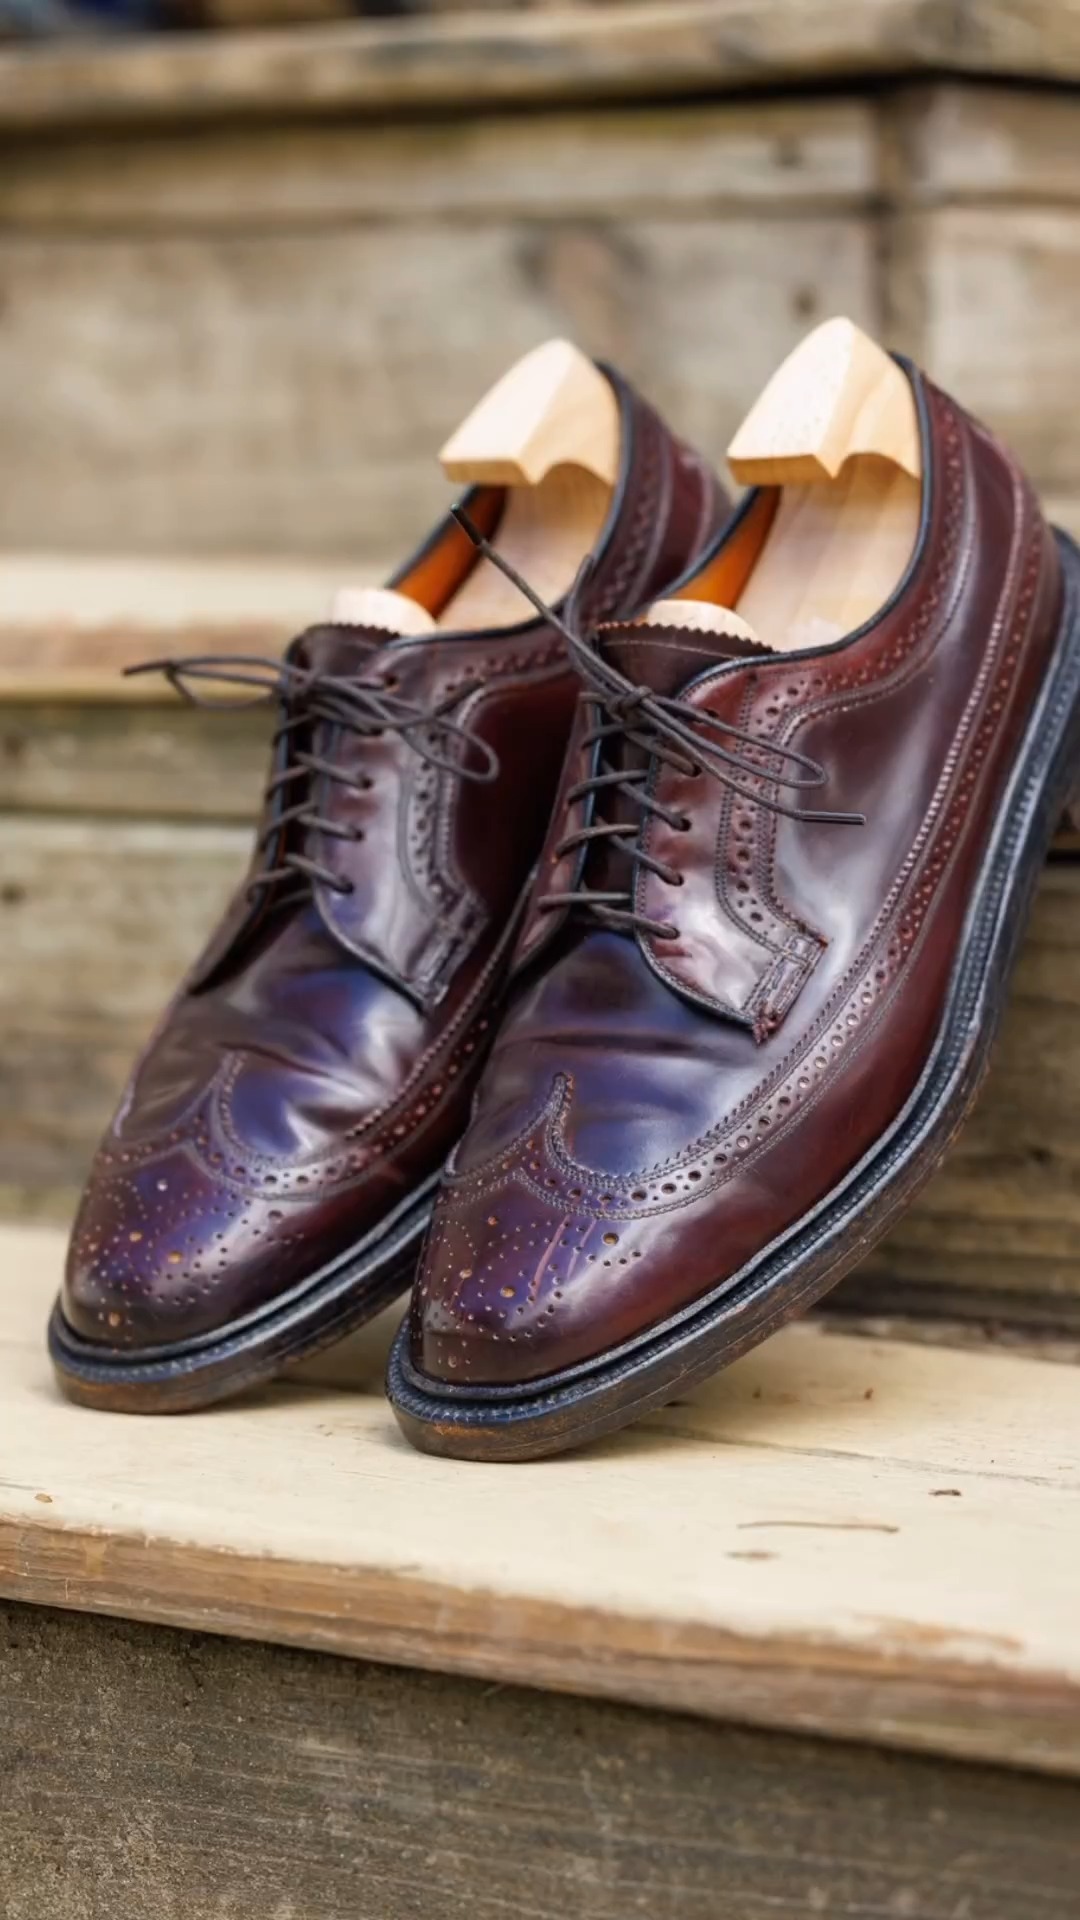 Sherlock hand-carved leather shoes